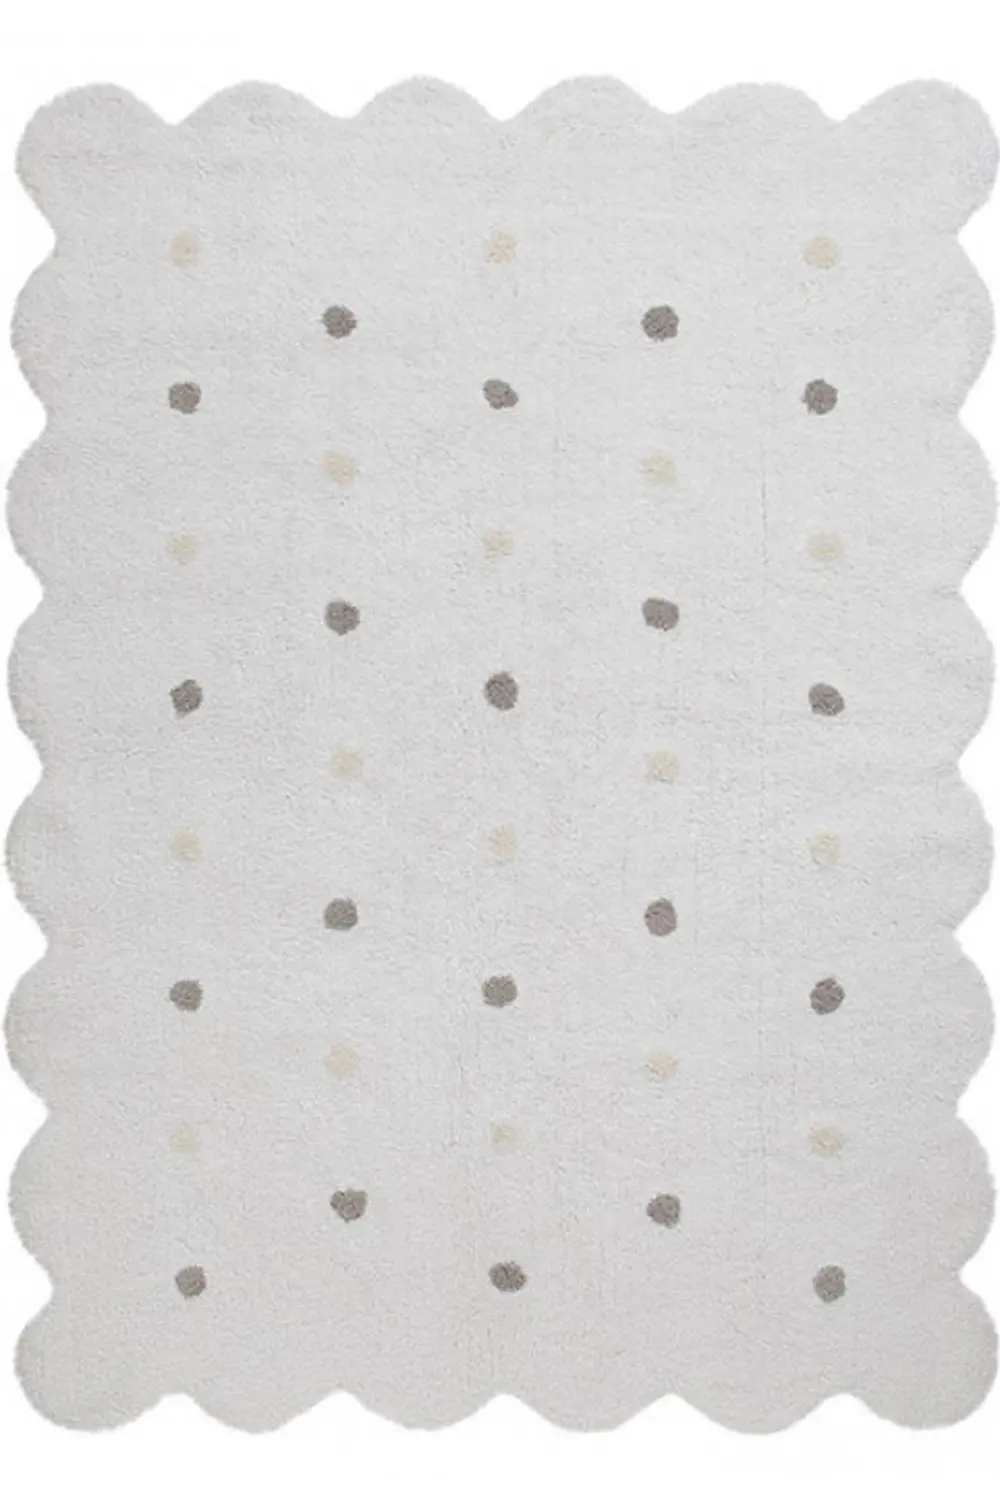 C-77770 4 x 5 Small Biscuit White Washable Rug-1